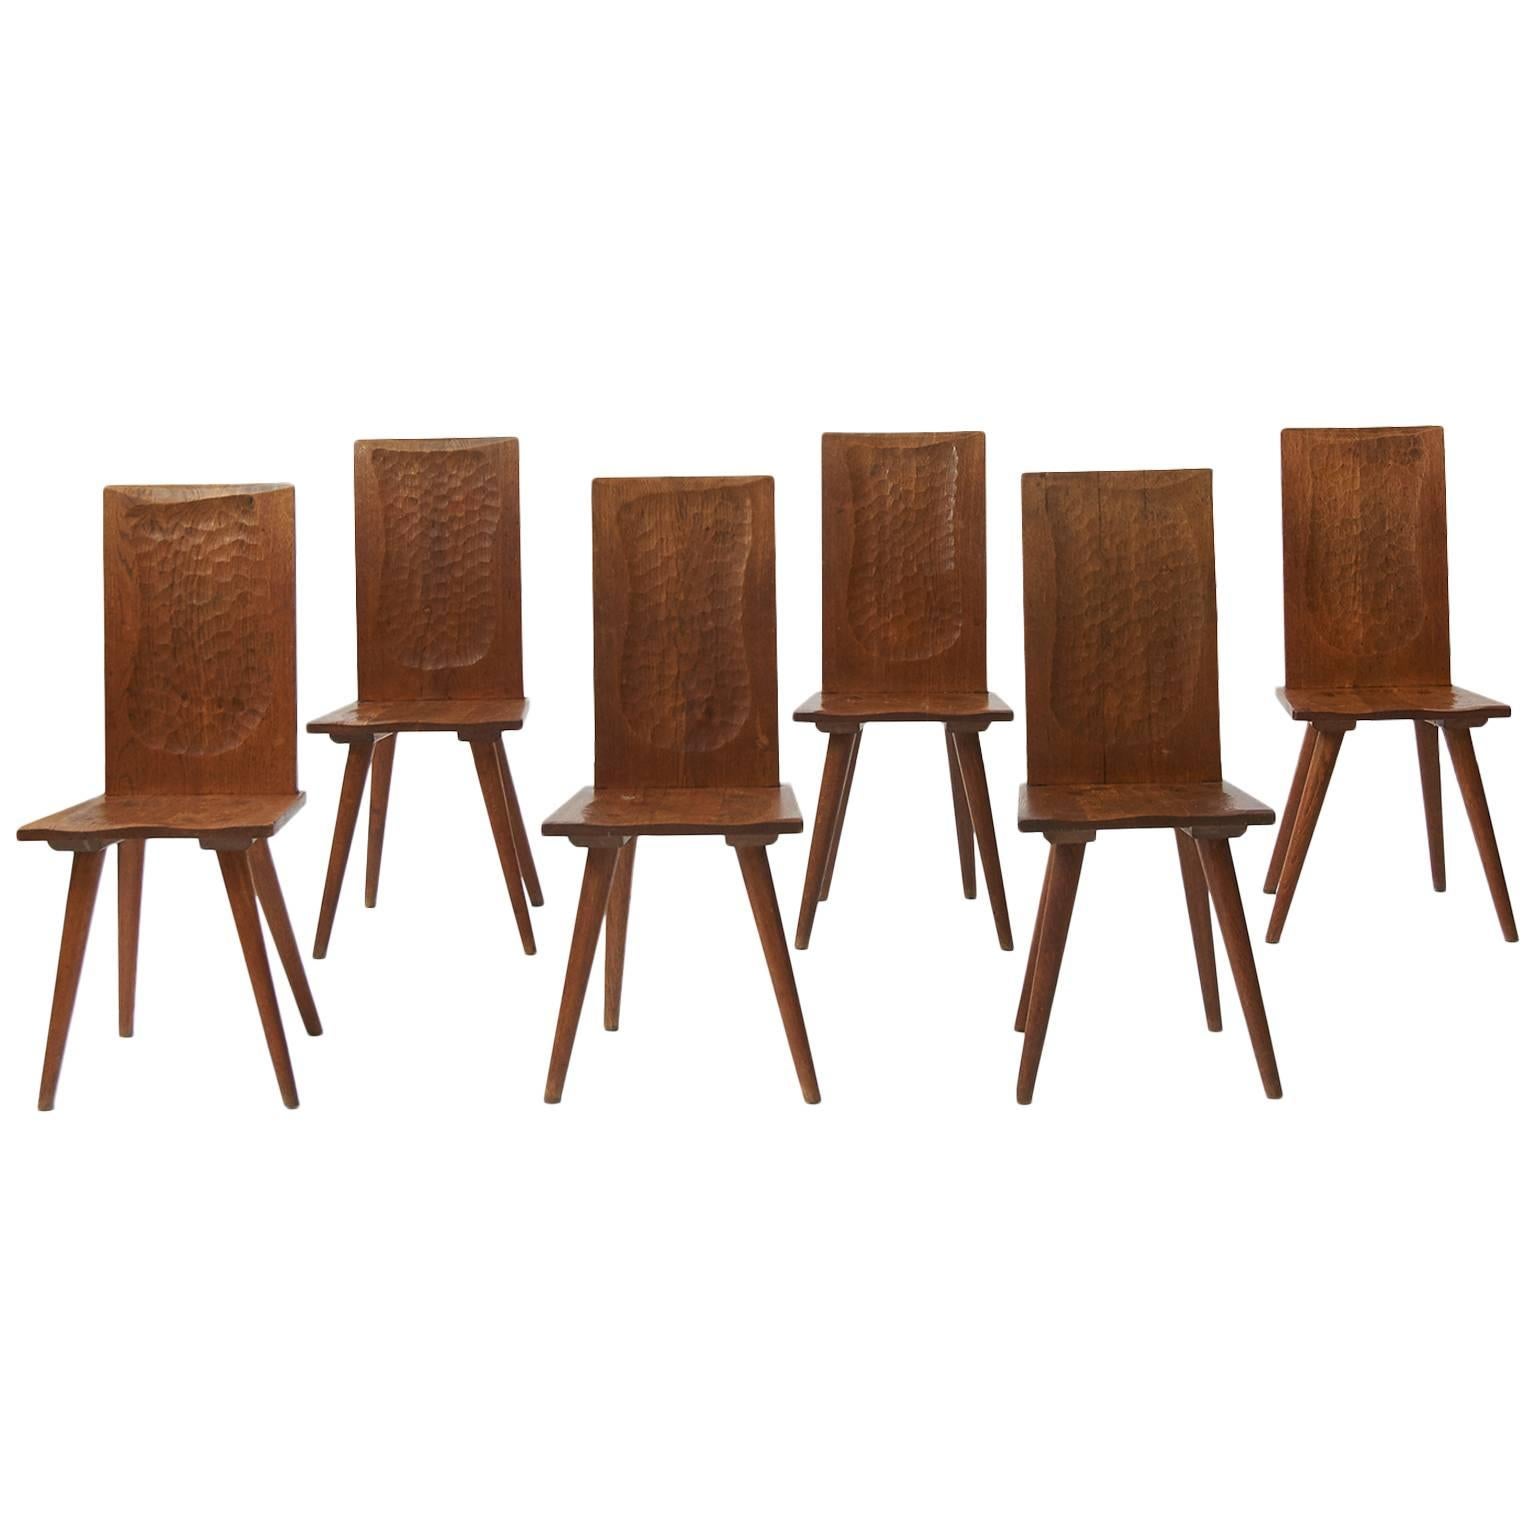 Jean Touret Dining Chairs for Atelier Marolles